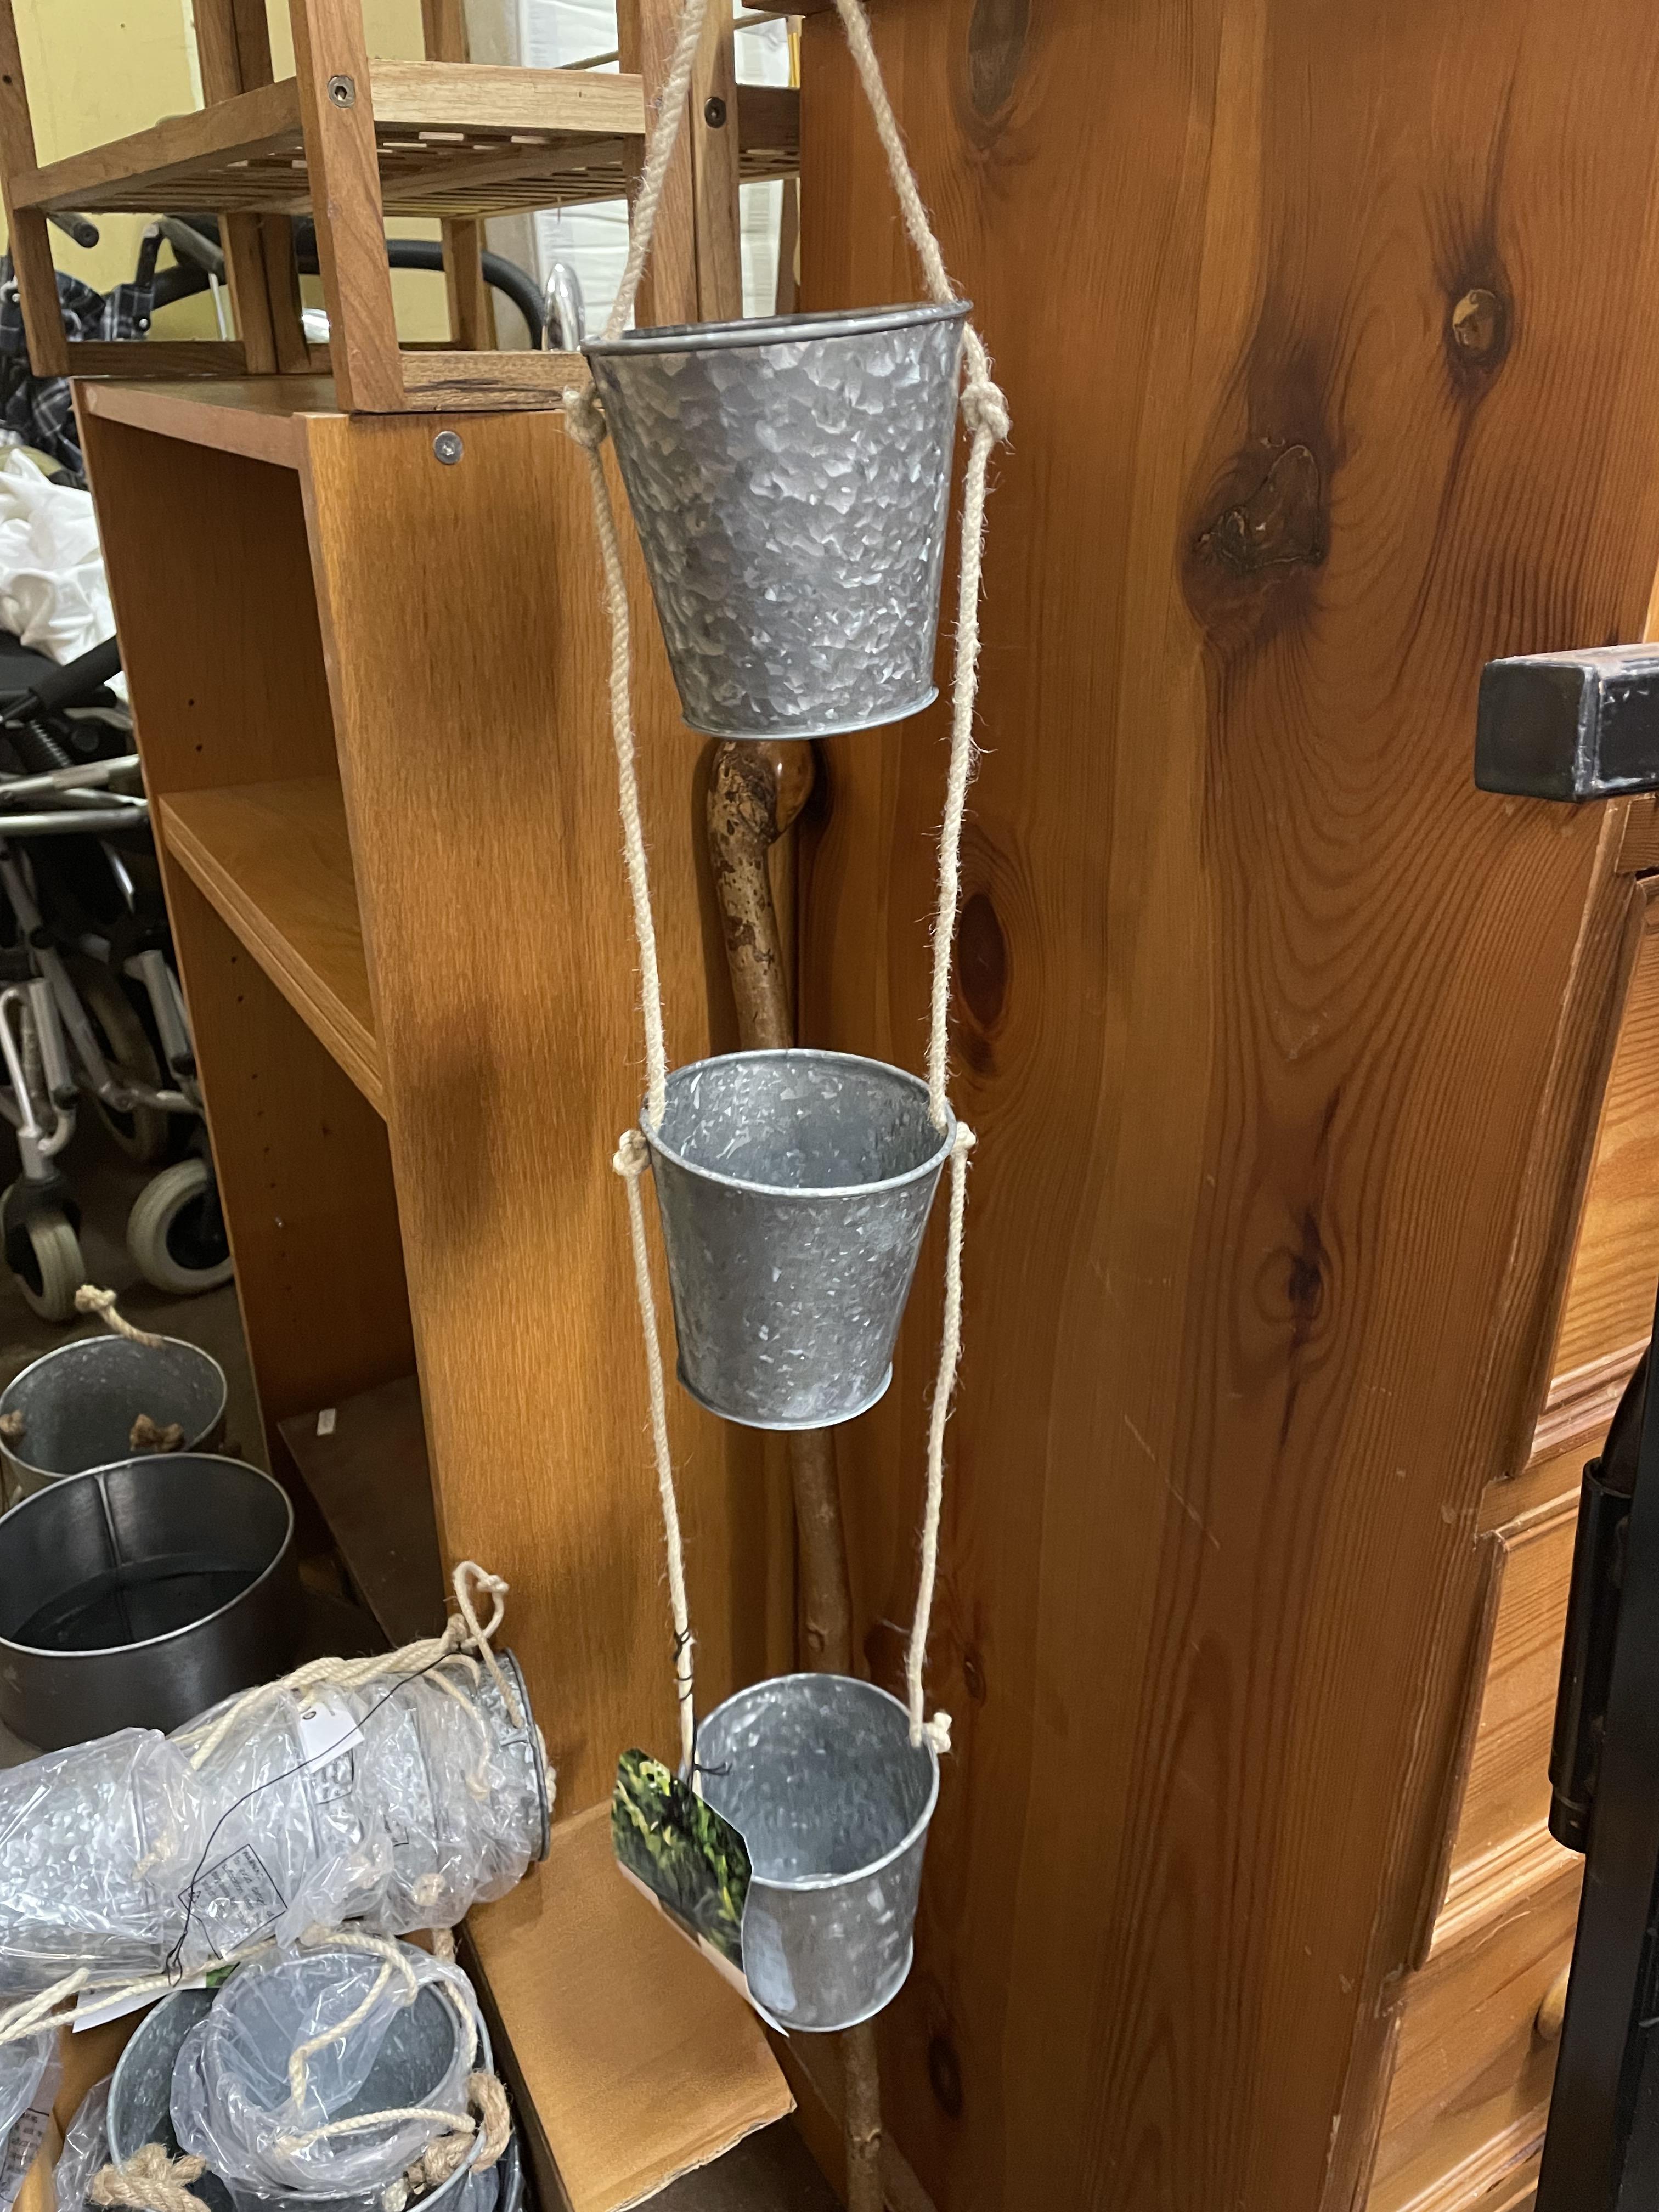 SELECTION OF GALVANIZED SET OF THREE PLANTERS AND A GALVANIZED MILK CHURN PLANTER - Image 3 of 4